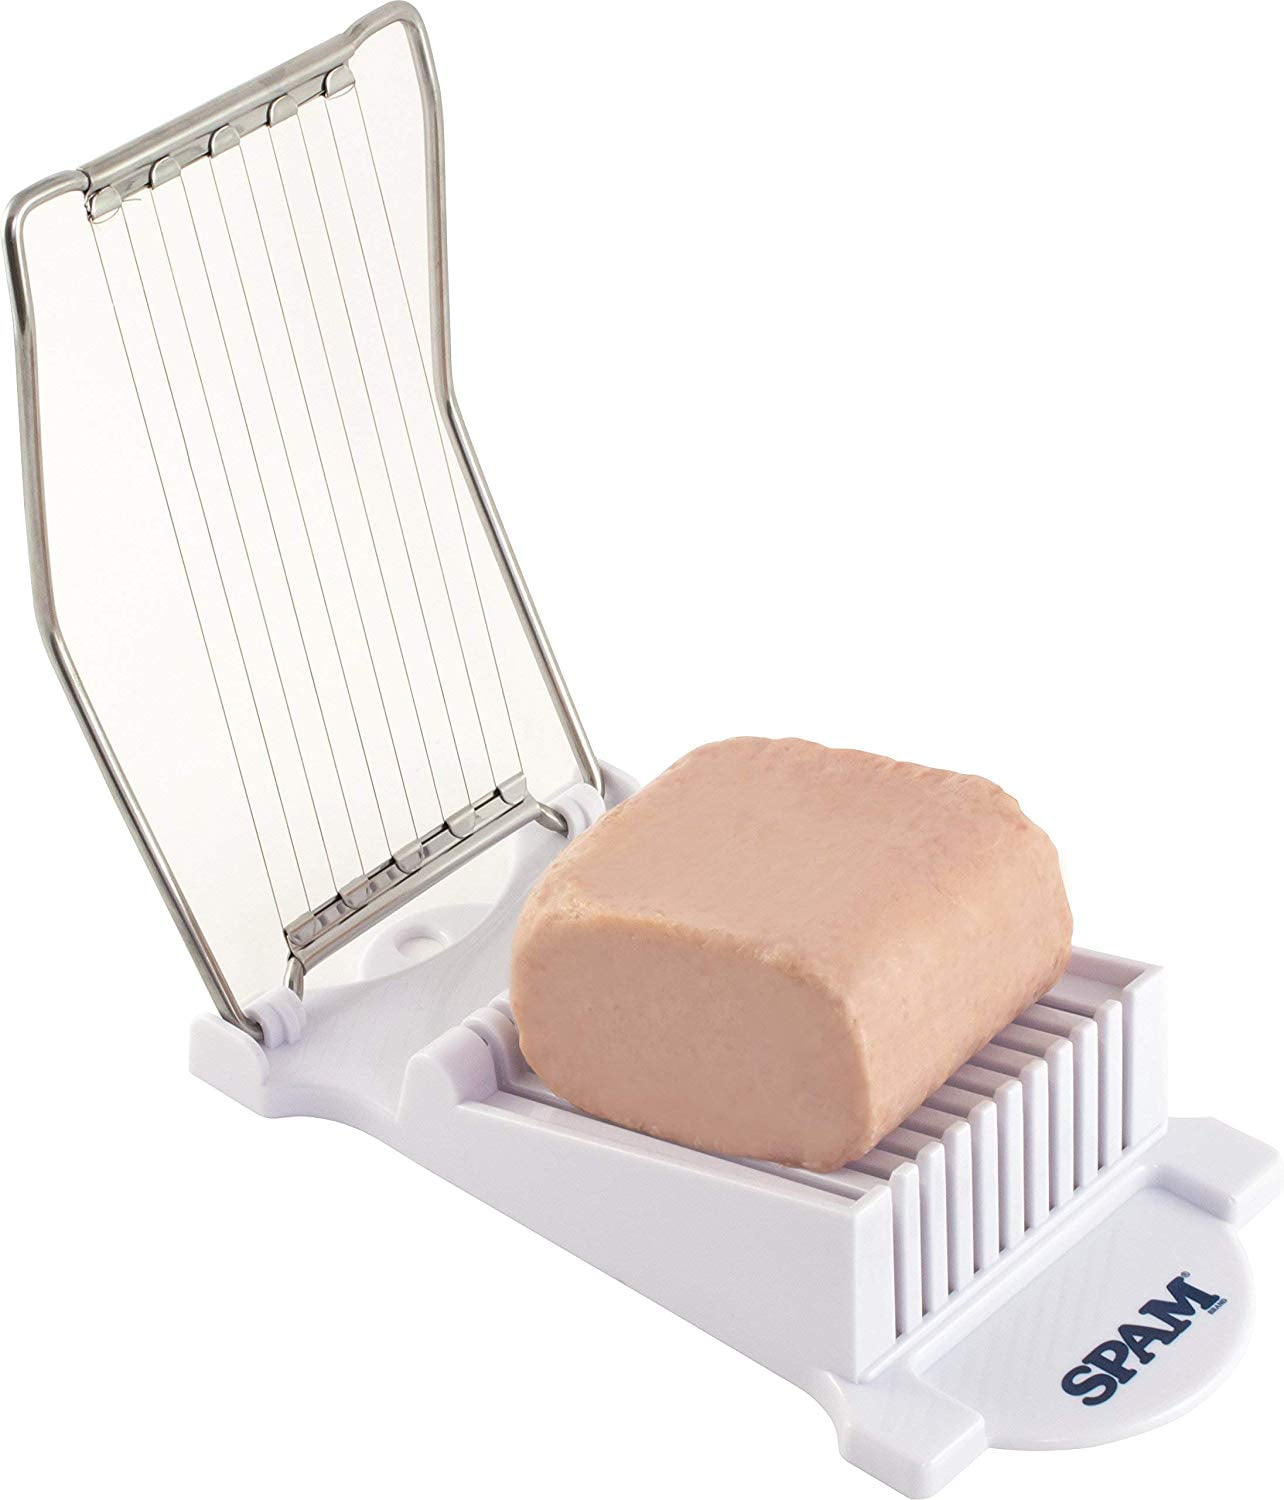 Hormel Spam Slicer, Stainless Steel Wires, Cuts 9 Slices